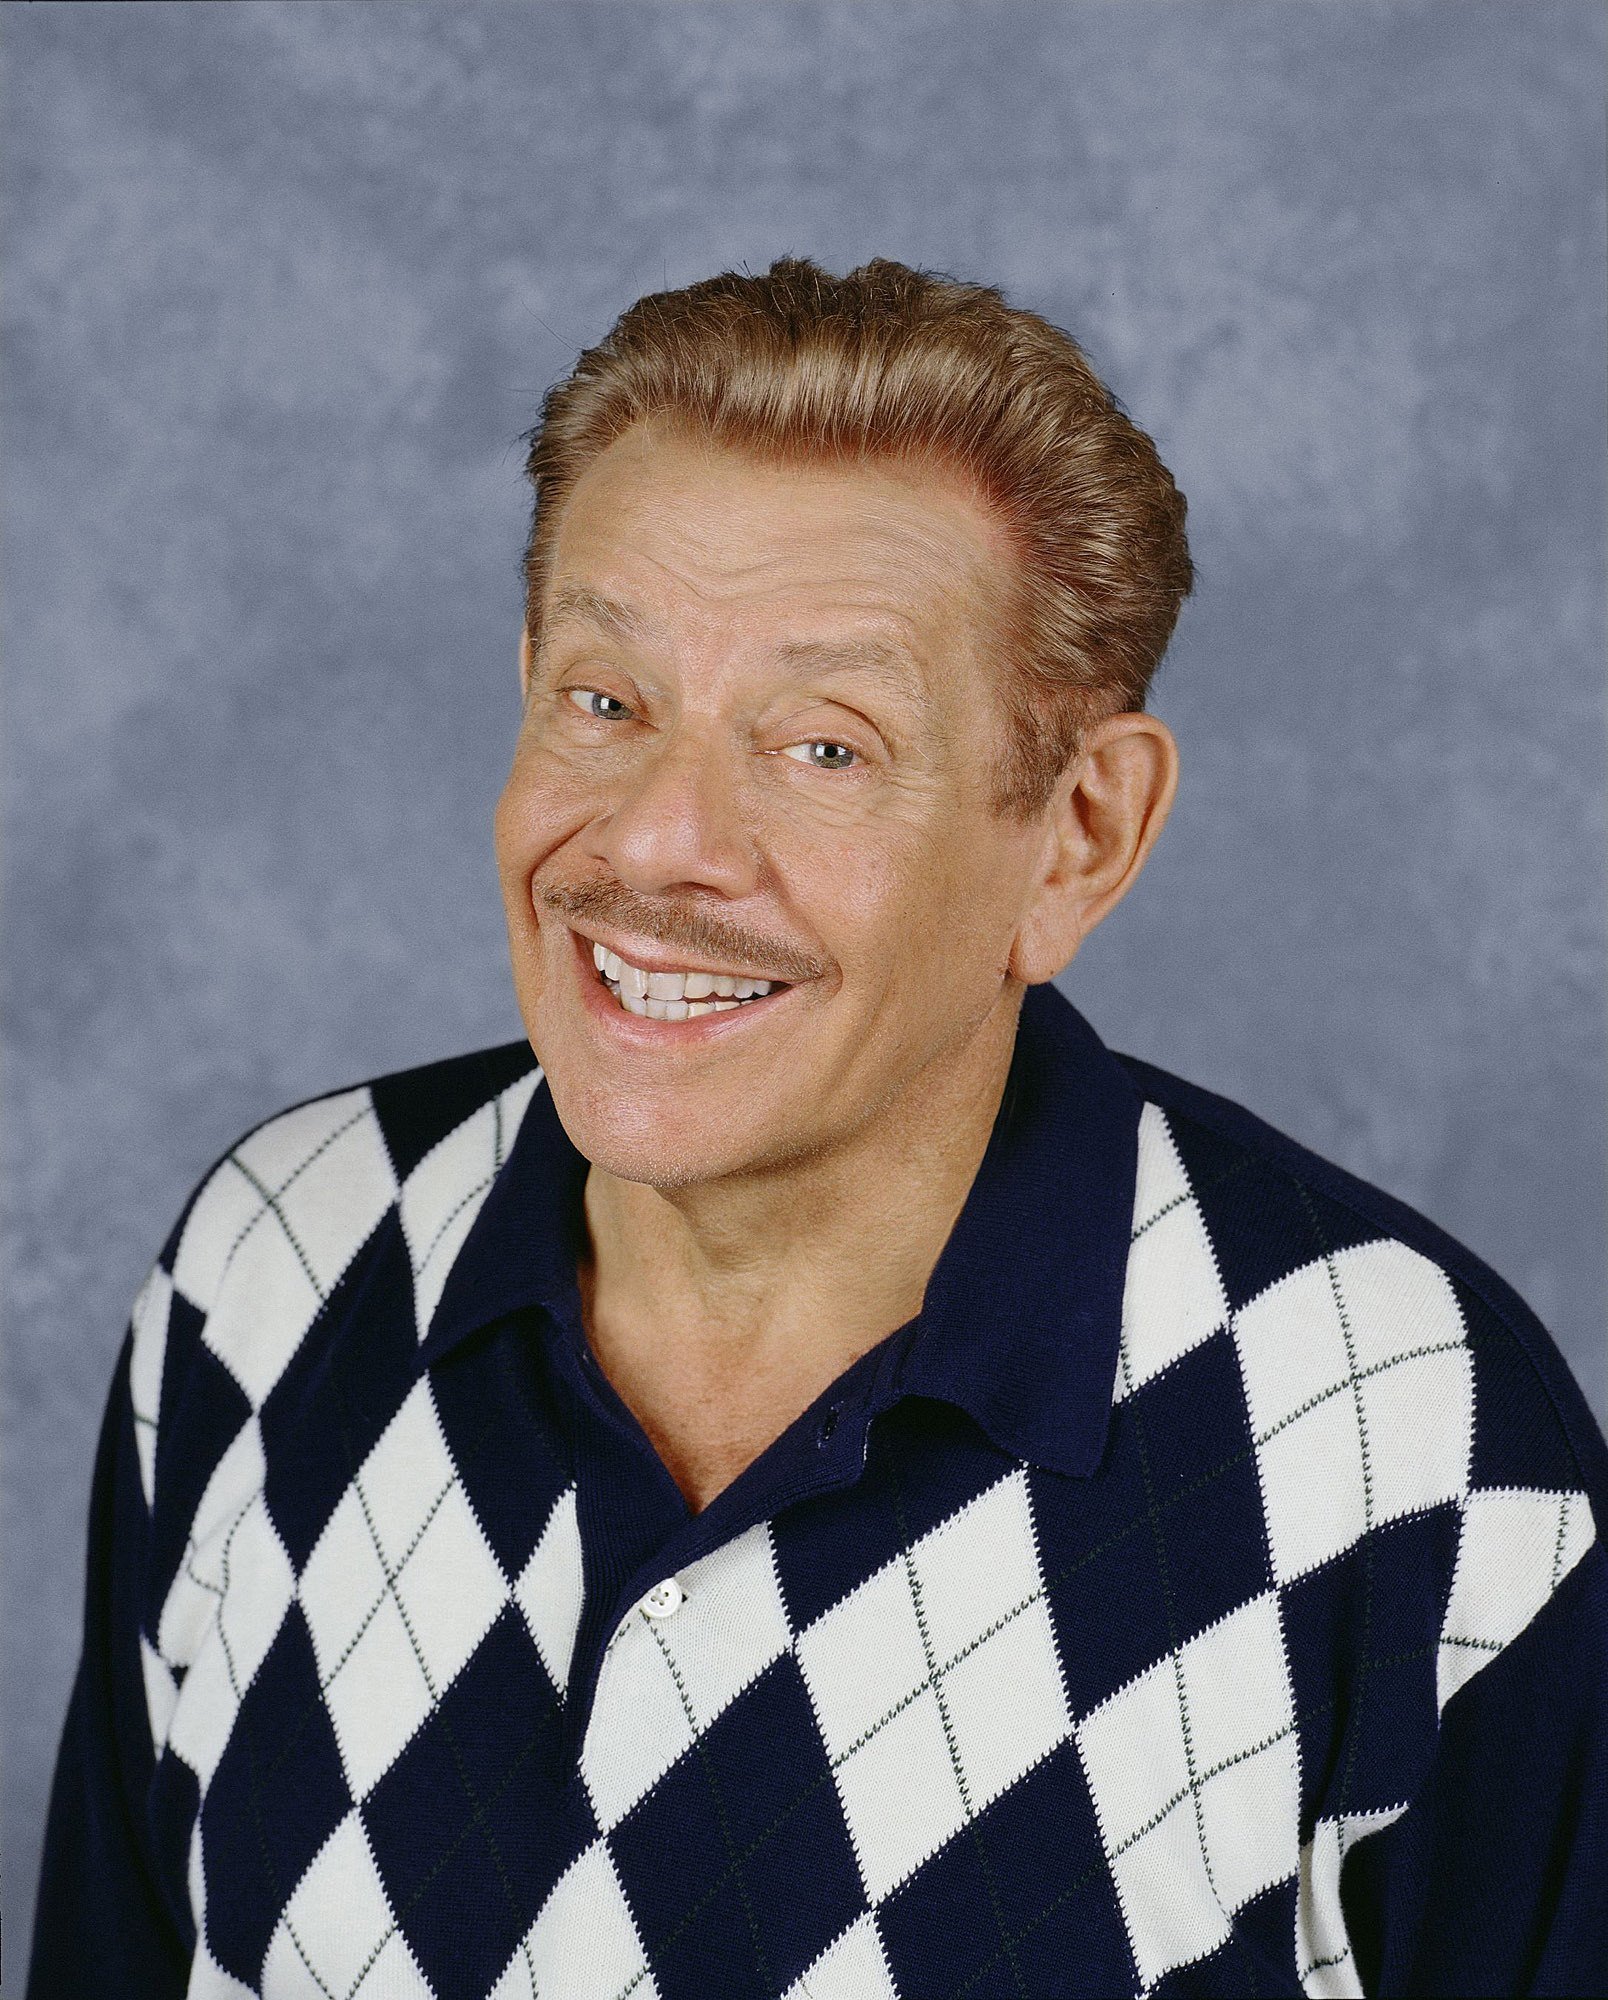 Jerry Stiller as Arthur on "The King of Queens" in July 2005 | Photo: Getty Images